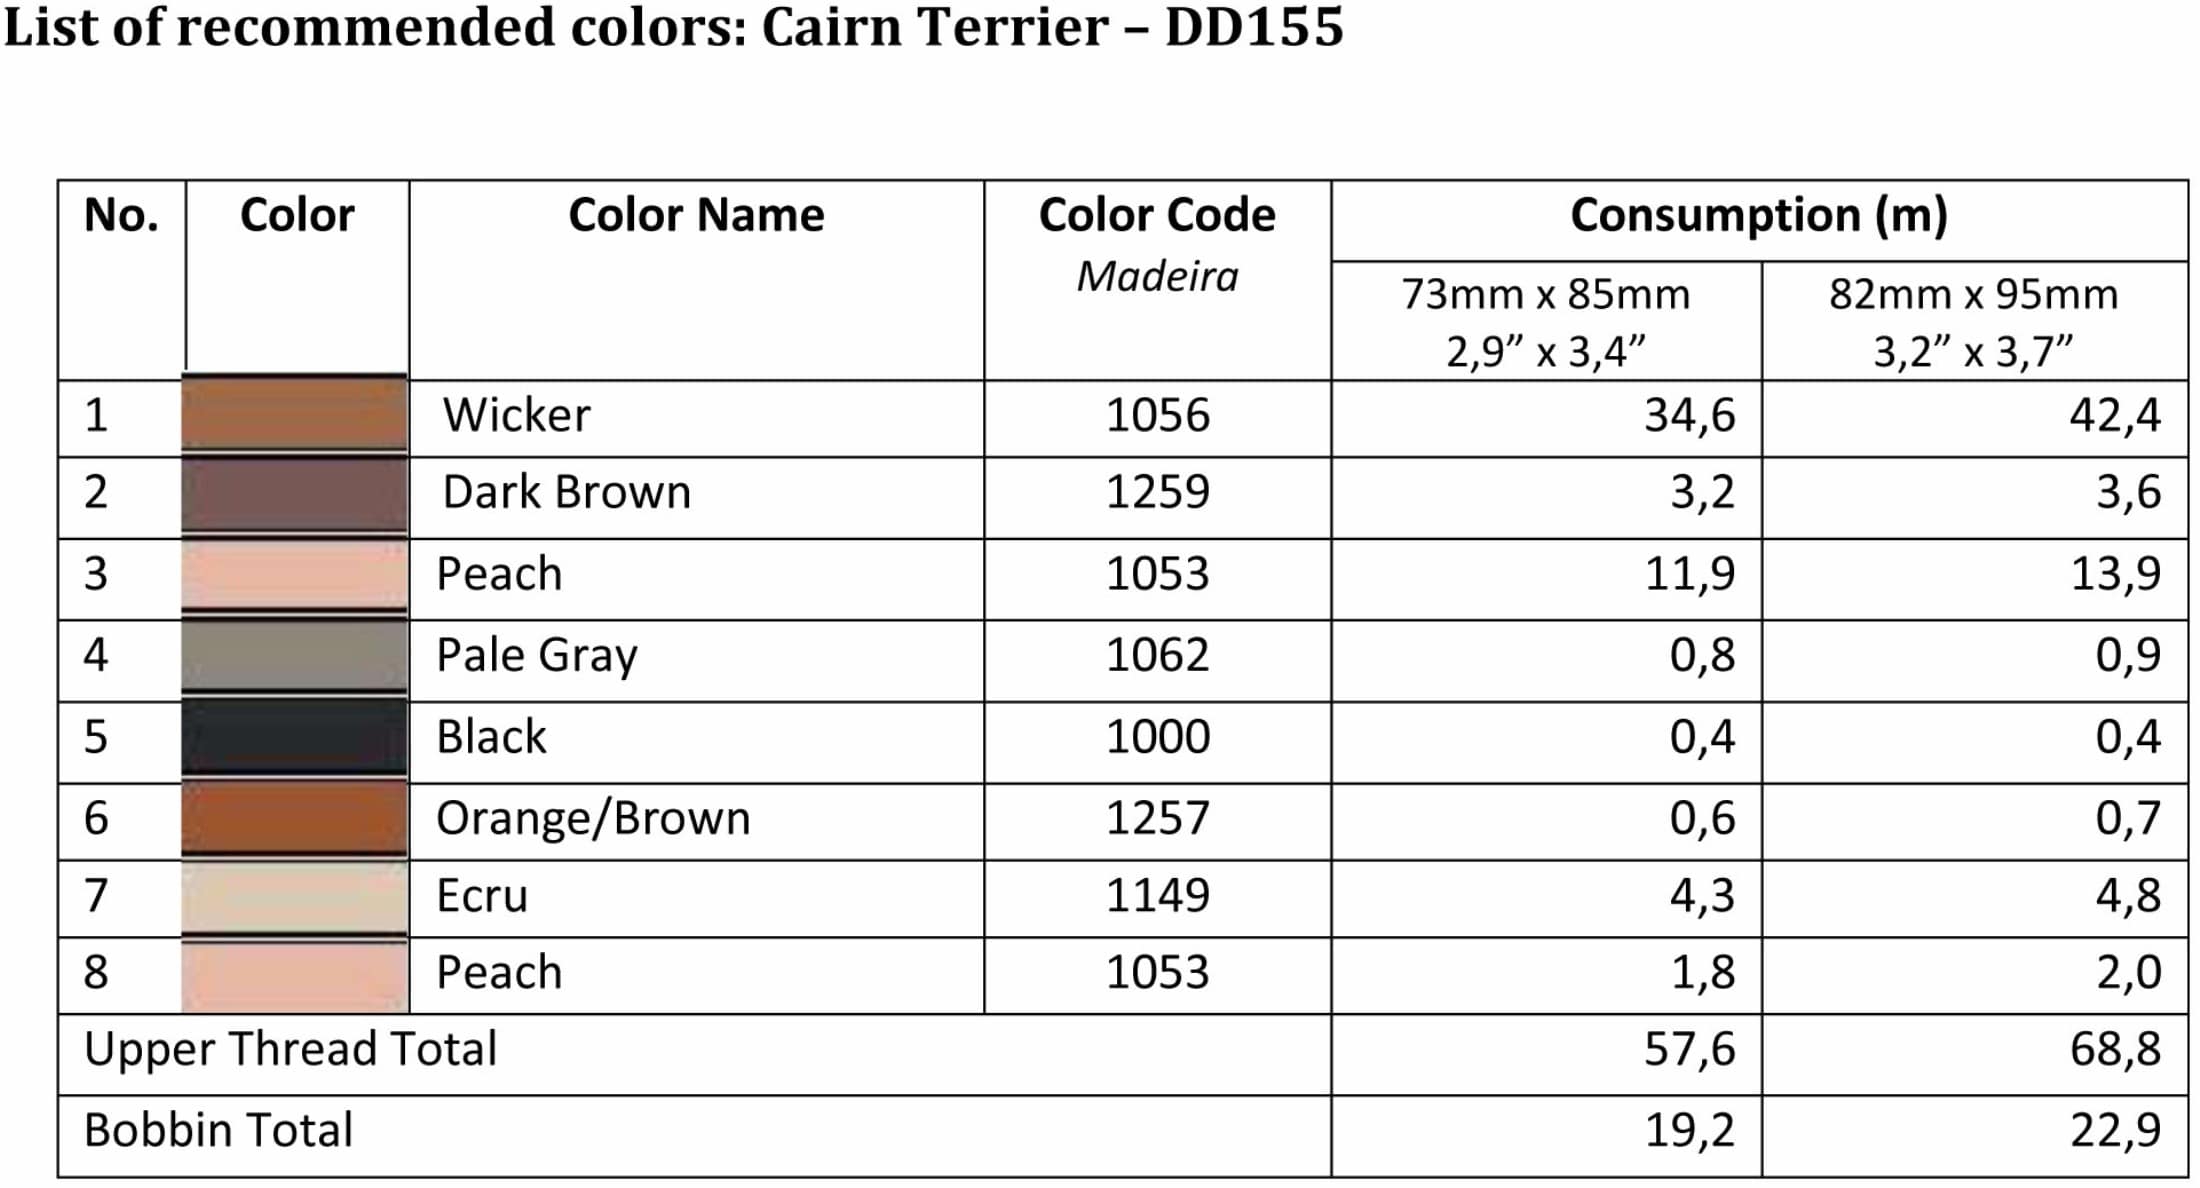 List of recommended colors - Cairn Terrier - DD155